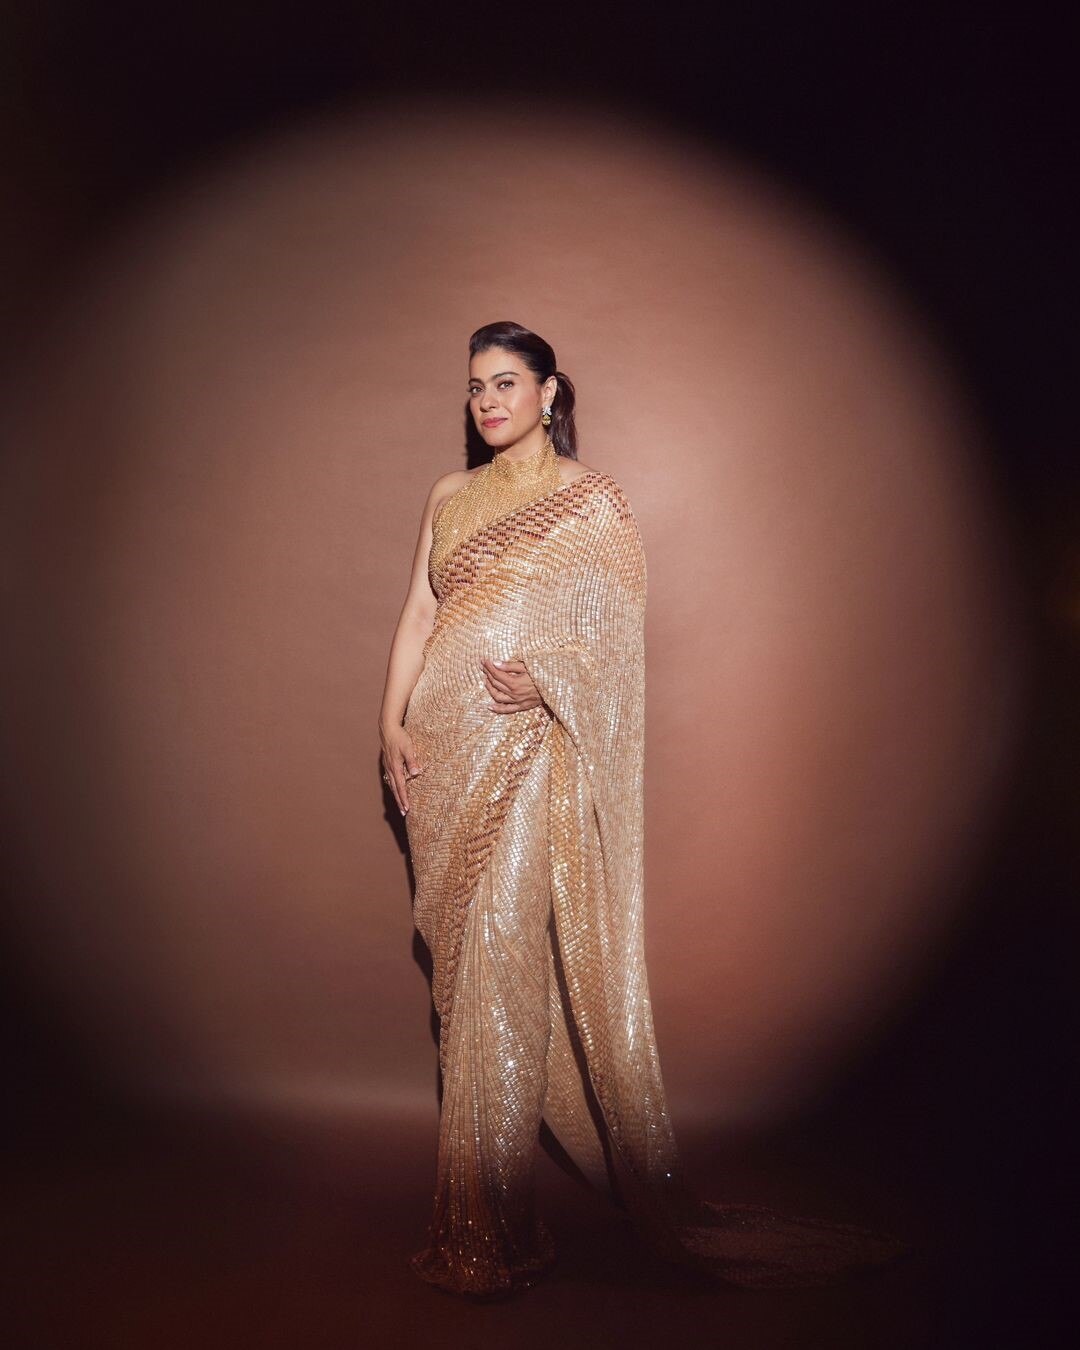 Check out Kajol's Pretty Look in a Beautiful Golden Saree with a Halter-Neck Blouse, Designed By Manish Malhotra dress